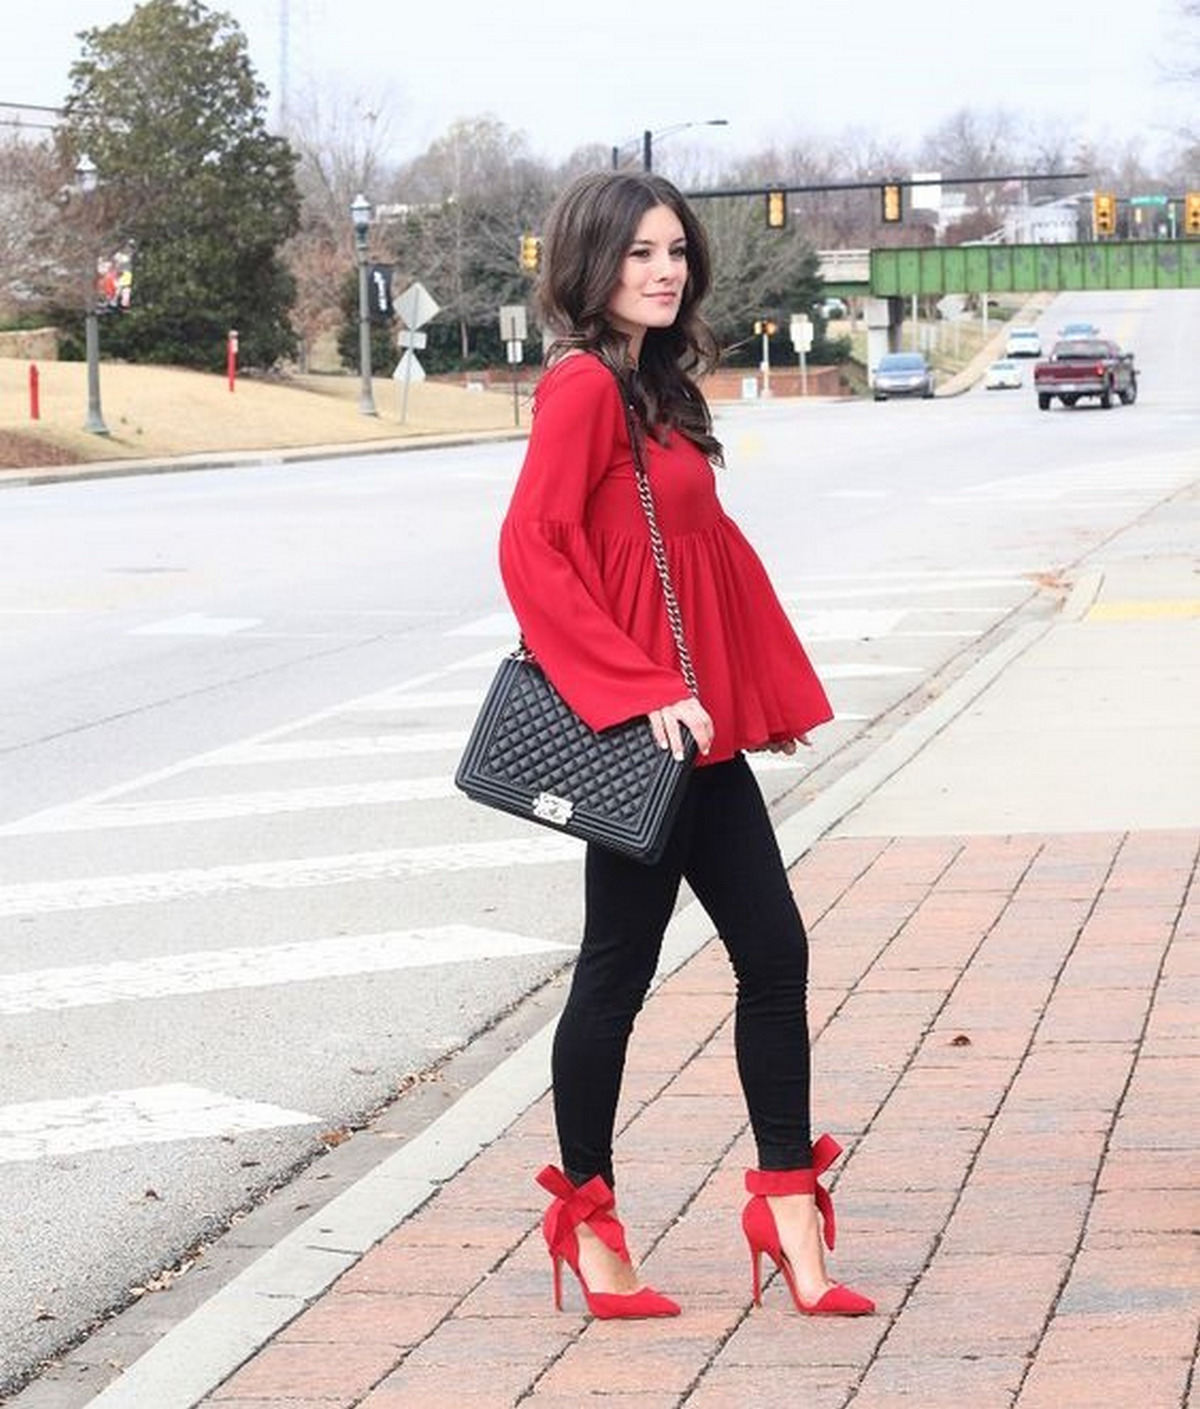  Red Blouse, Skinny Black Pants, And Red Ankle-High Heels